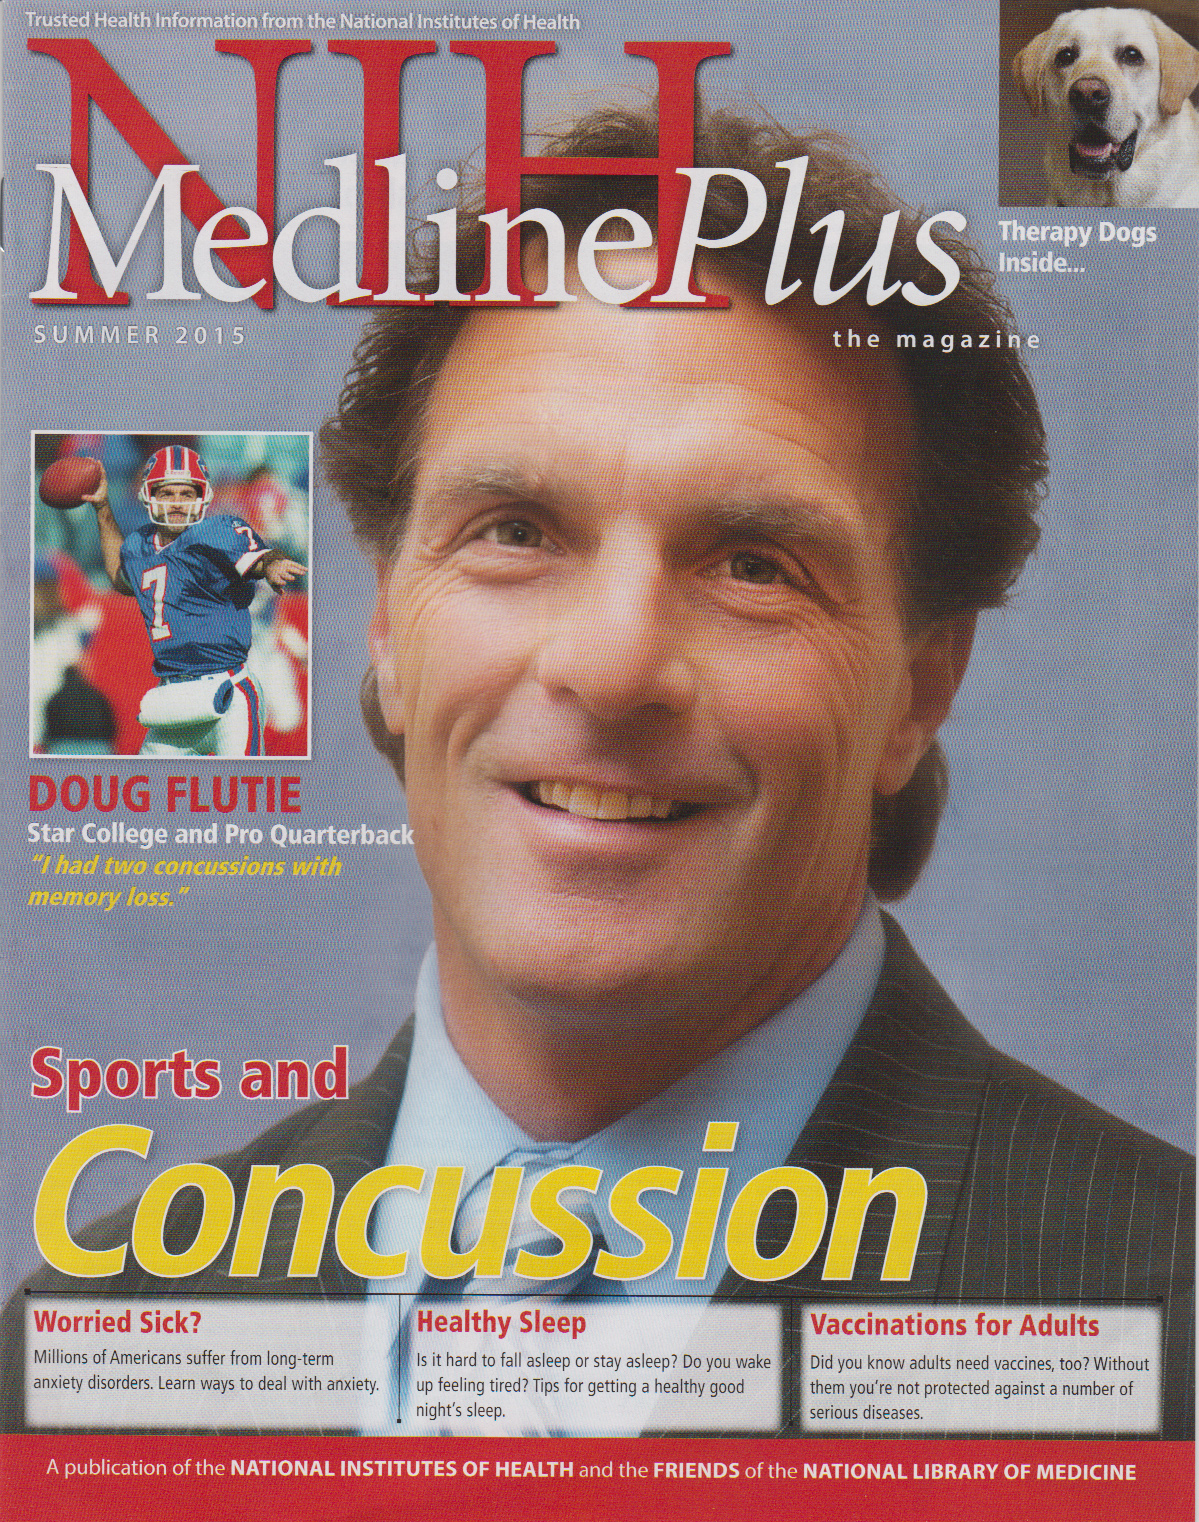 Cover of NIH MedlinePlus the Magazine Summer 2015 Issue